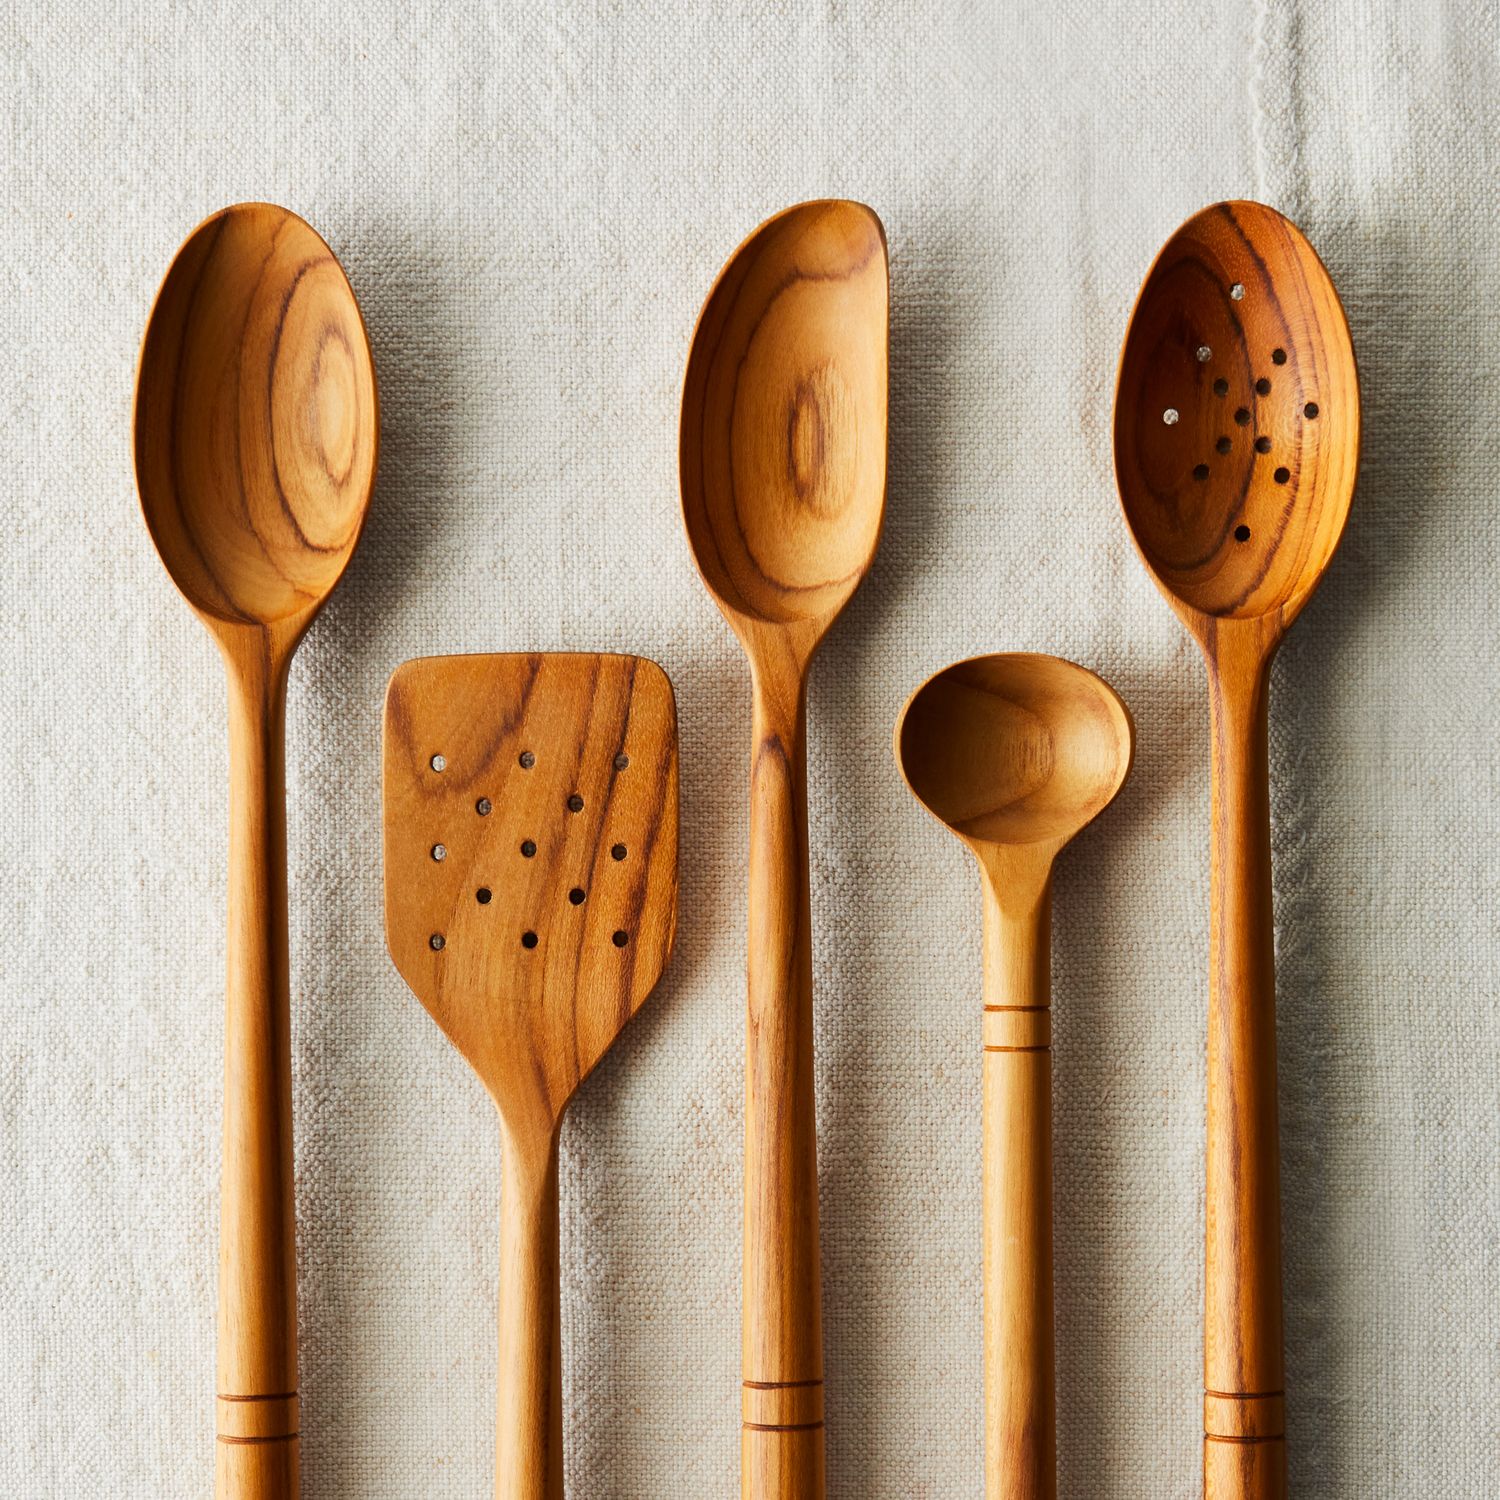 Five Two Wooden Spoons from Food52's Product Line on Food52